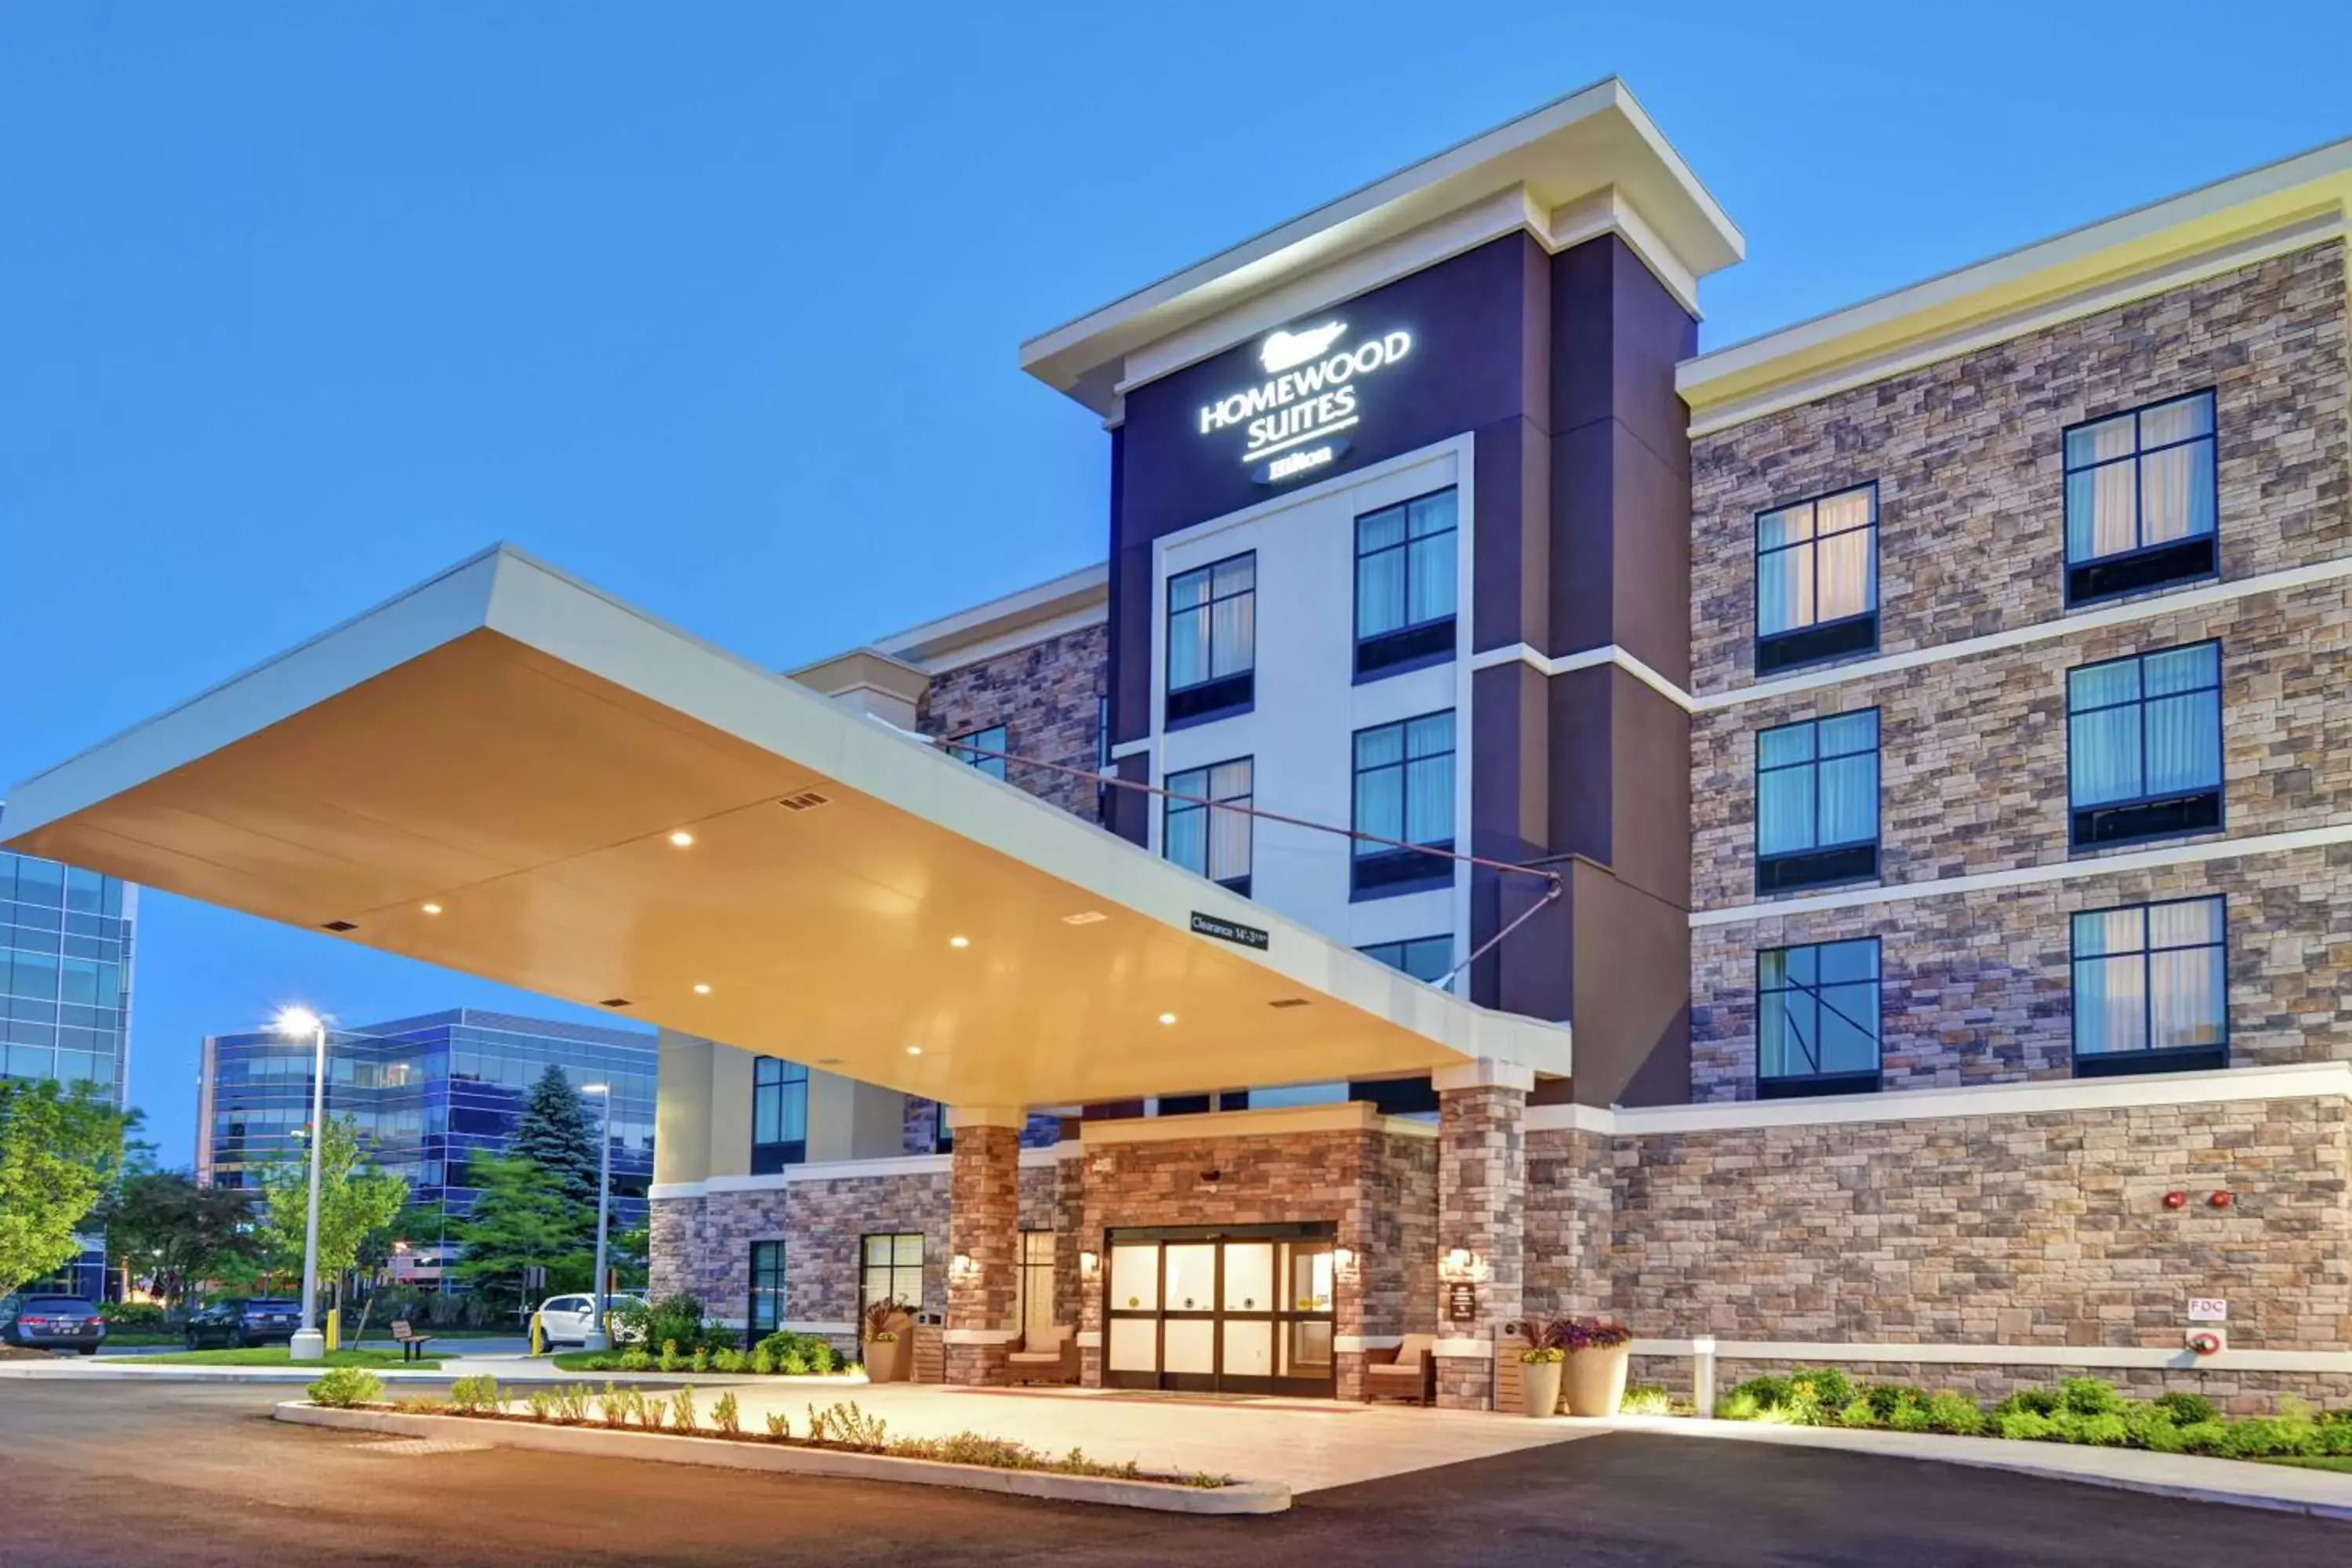 Property Building in Homewood Suites By Hilton Poughkeepsie